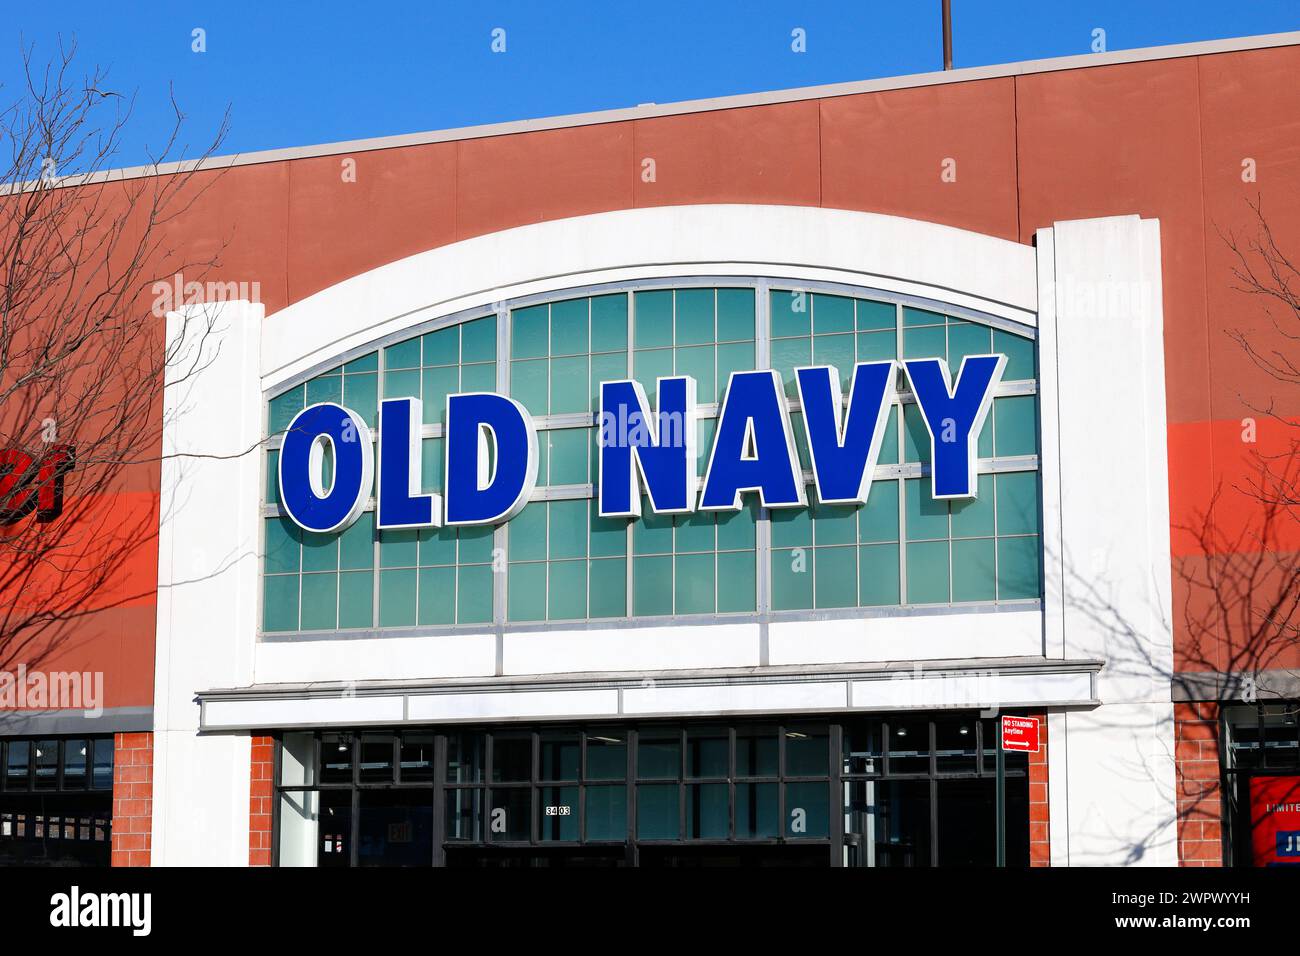 An Old Navy storefront and signage at a mall in Queens County, New York City. Old Navy is an American clothing retailer owned by the Gap. Stock Photo